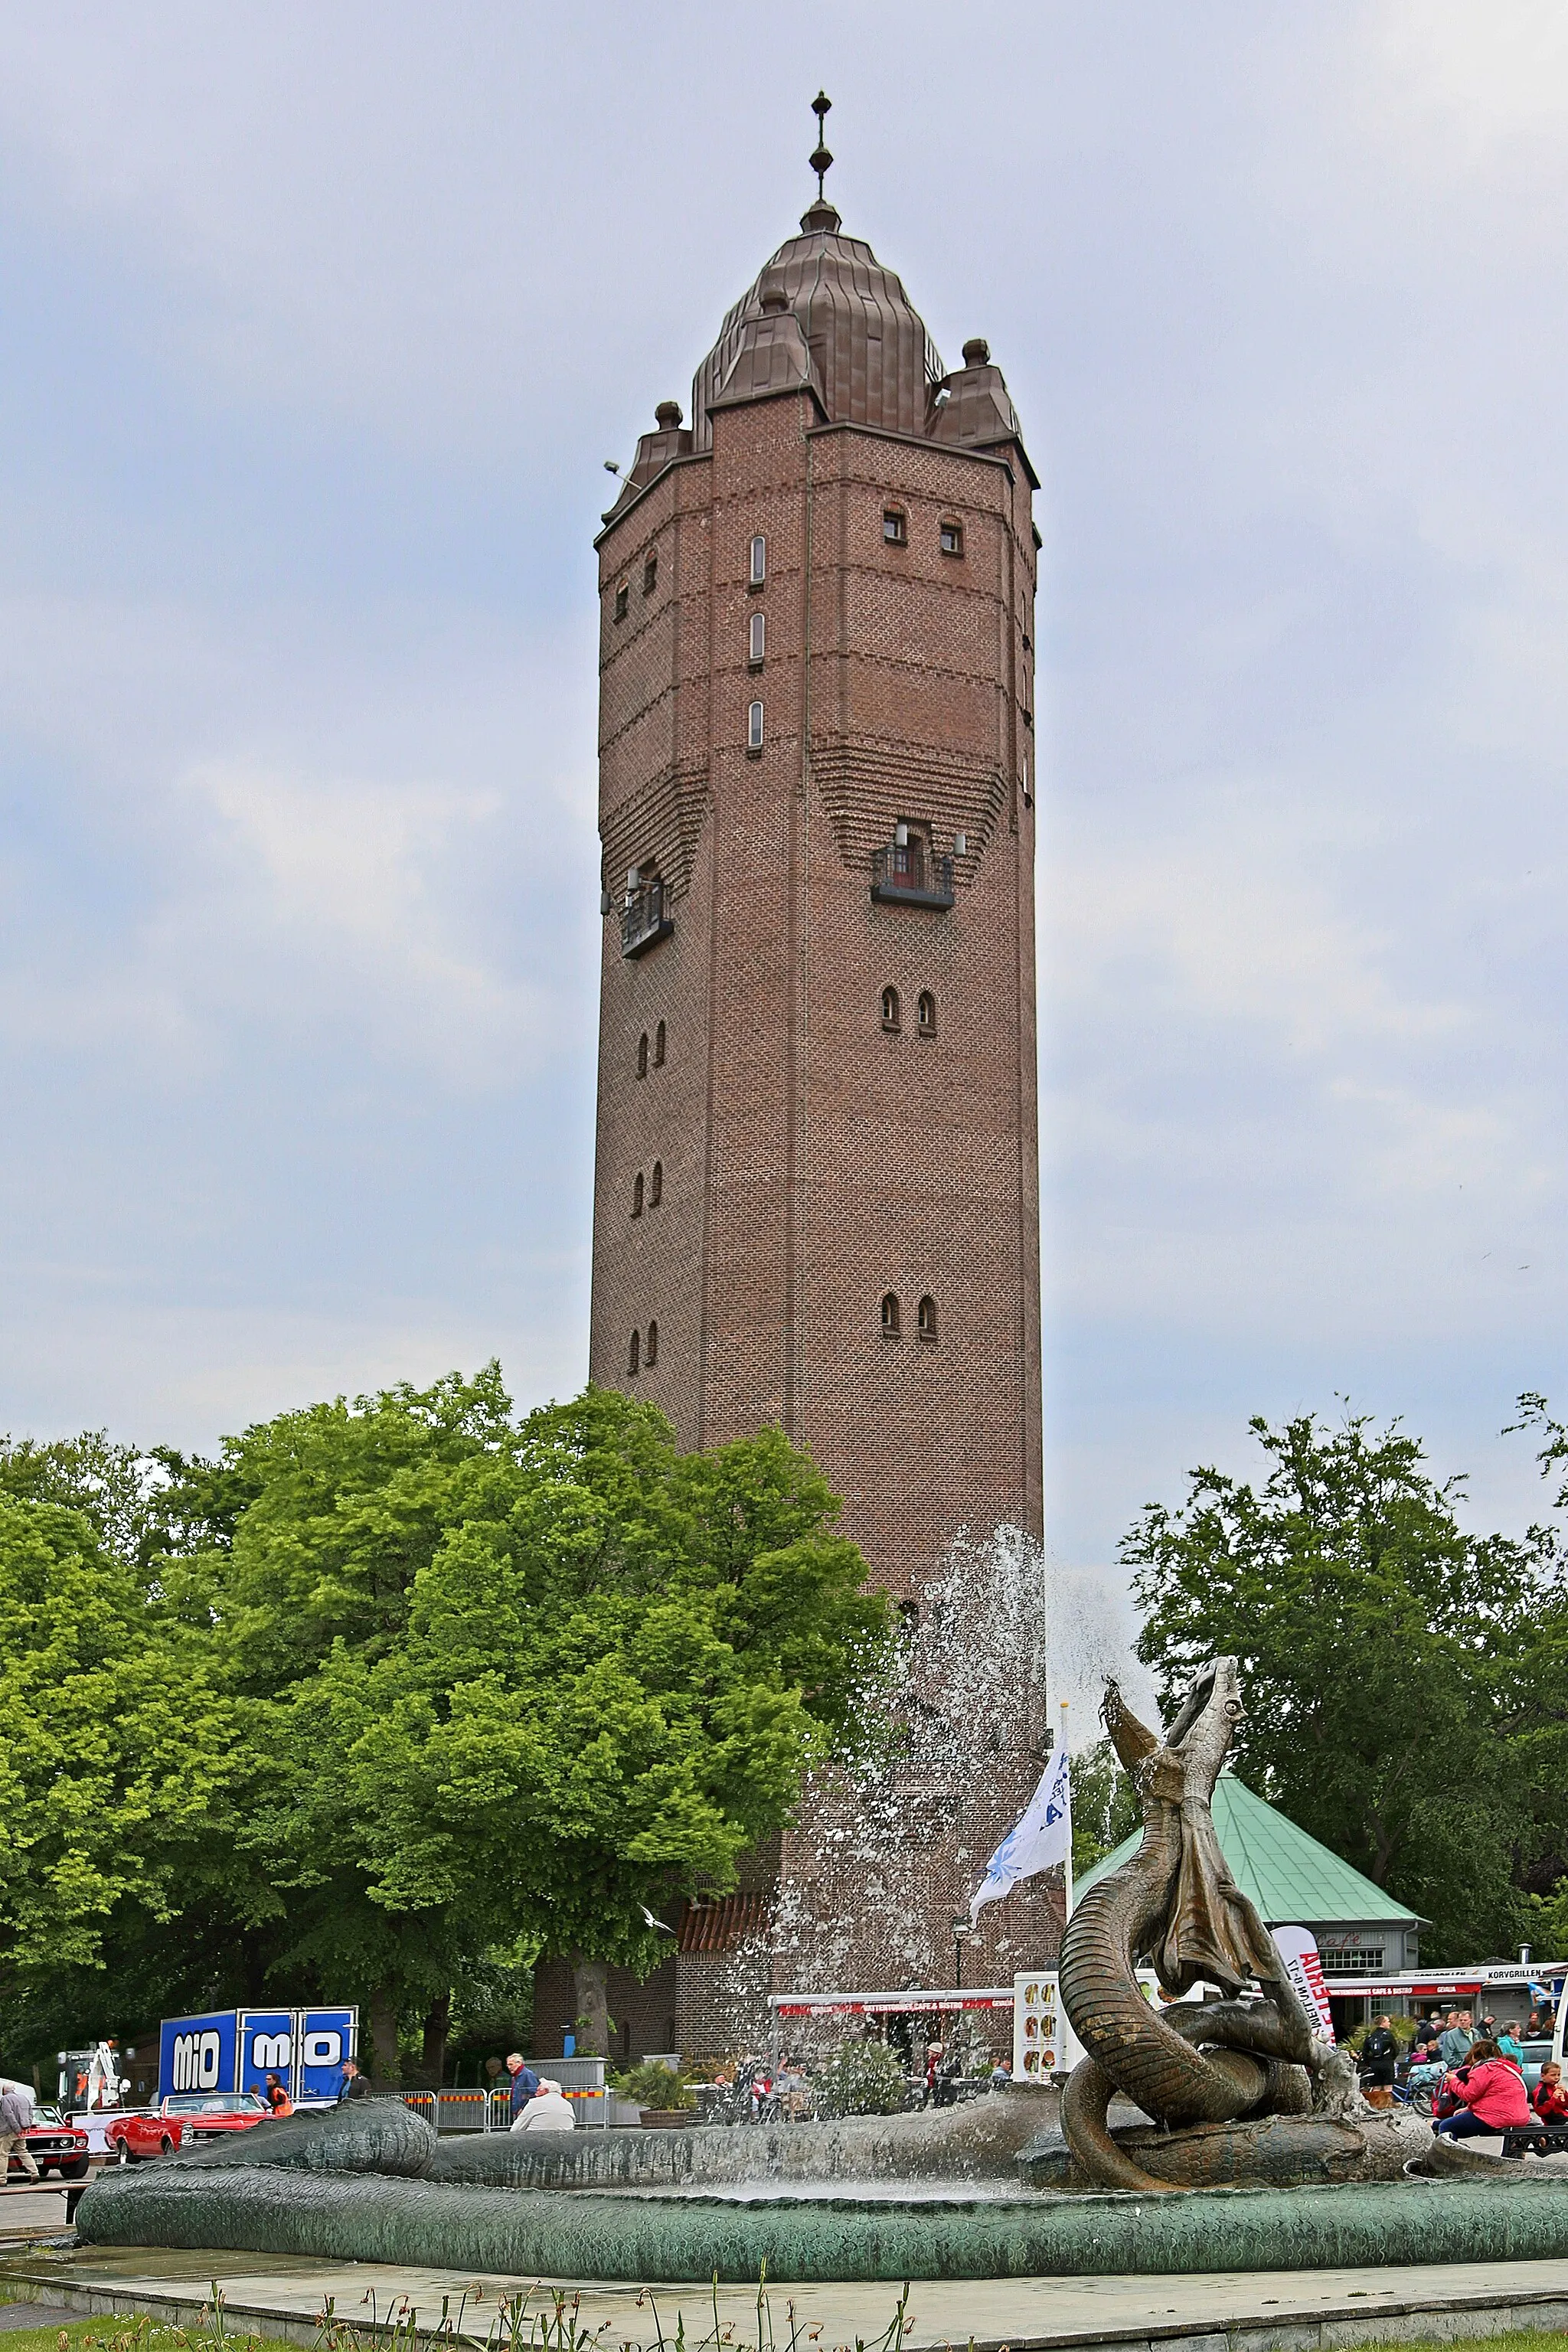 Photo showing: Trelleborg water tower, Sweden. The tower, built in 1911 with a height of 58 meters, was in operation as a water tower until 1971. In the foreground the whale fountain (Valvisken Större). Trelleborg is a city in the Swedish province of Skåne County.